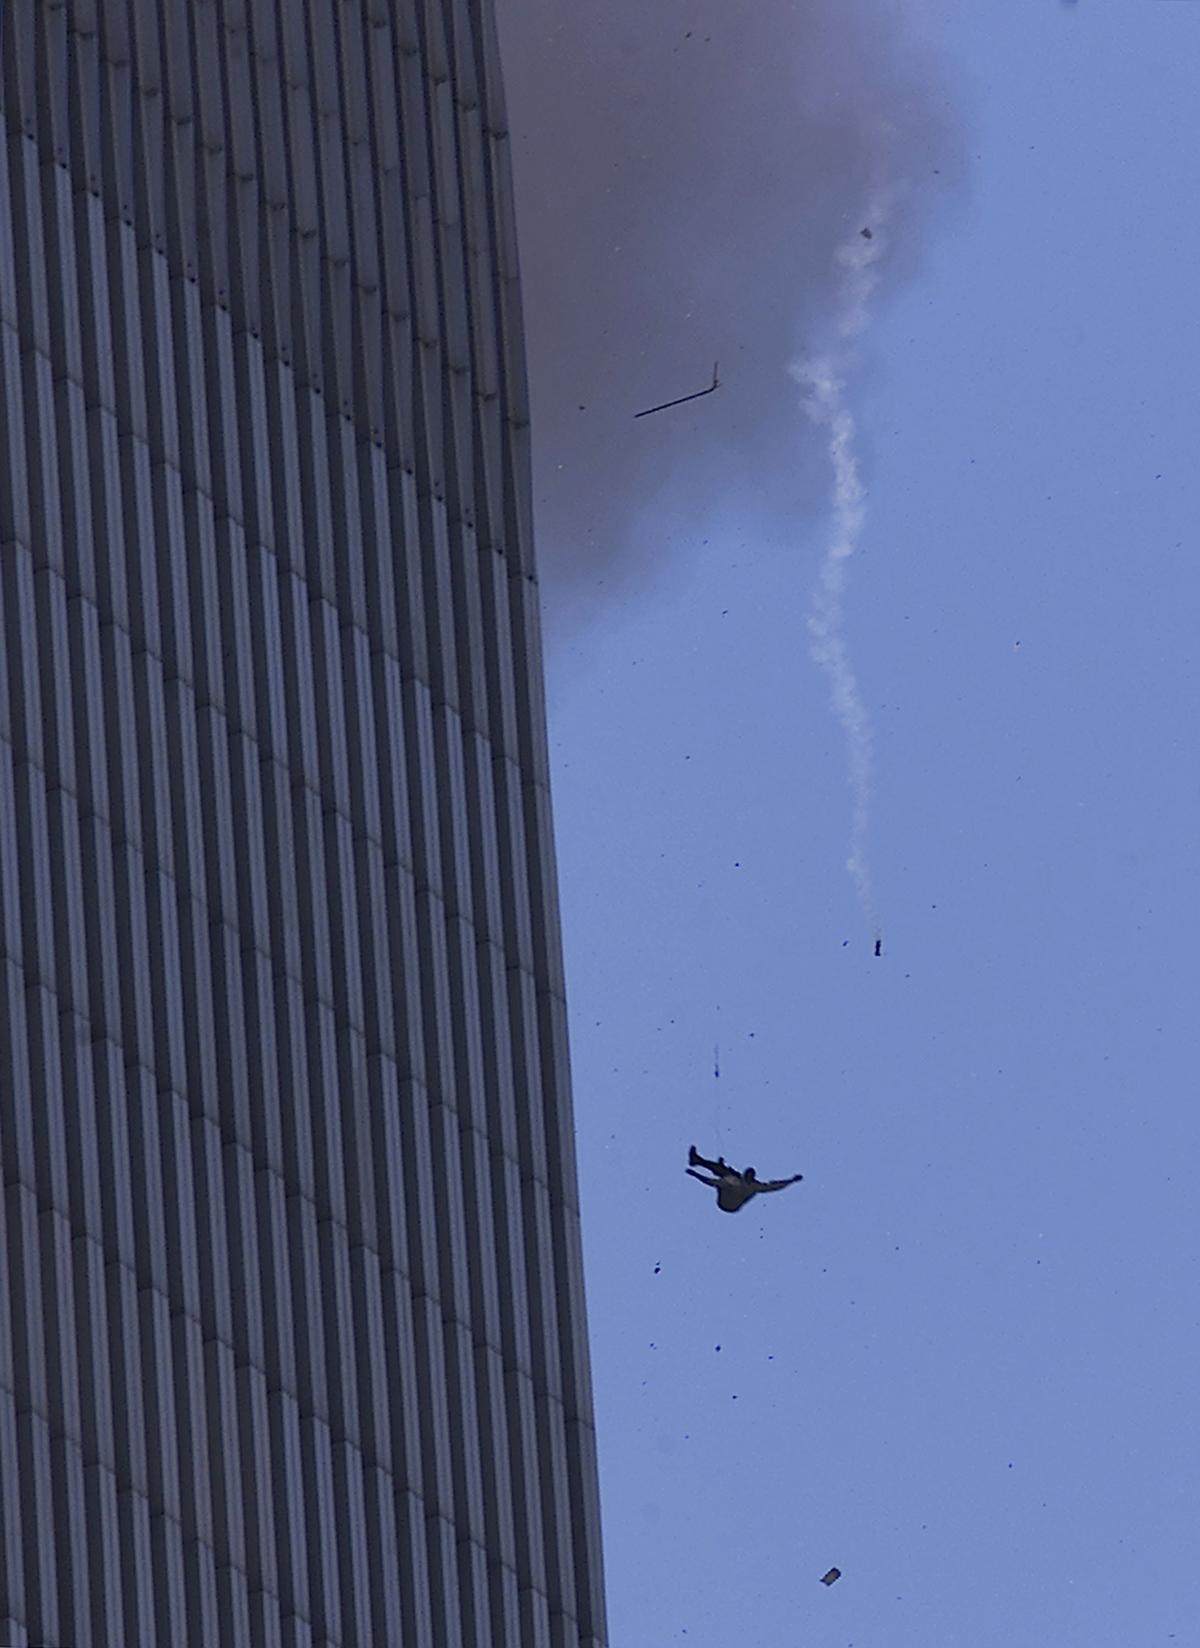 A man falls to his death from the World Trade Center in New York City after two planes hit the building Sept. 11, 2001. (Jose Jimenez/Primera Hora/Getty Images)